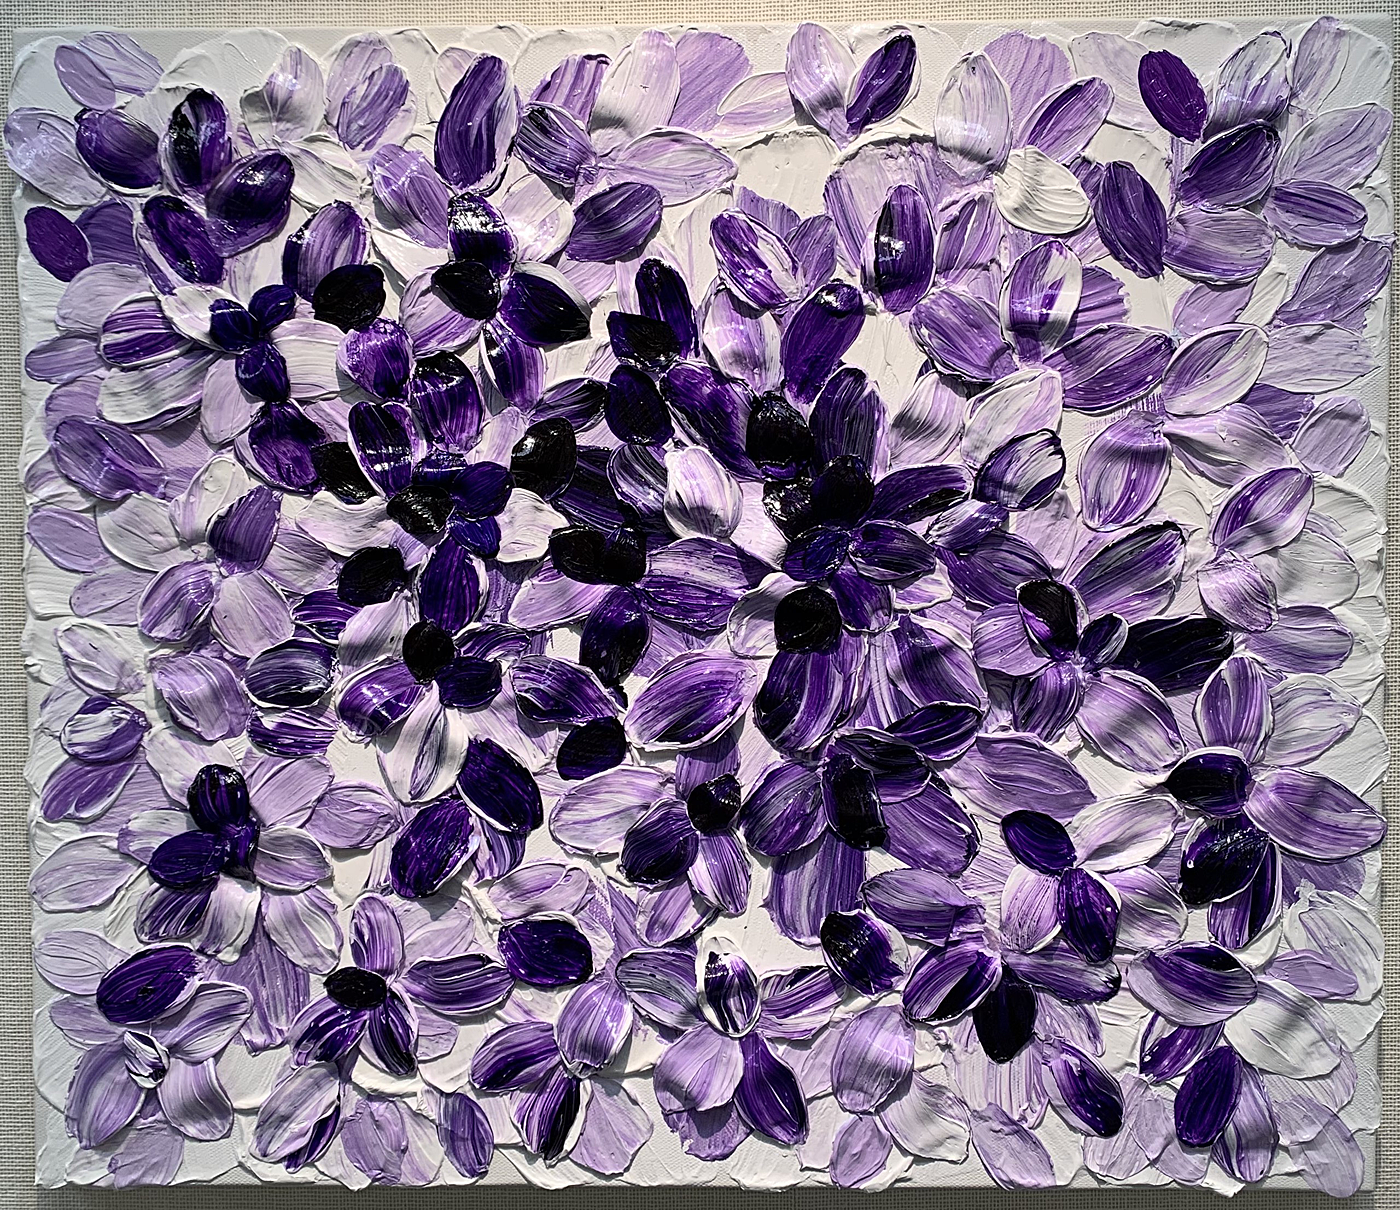 INFINITY Into the Violet No2